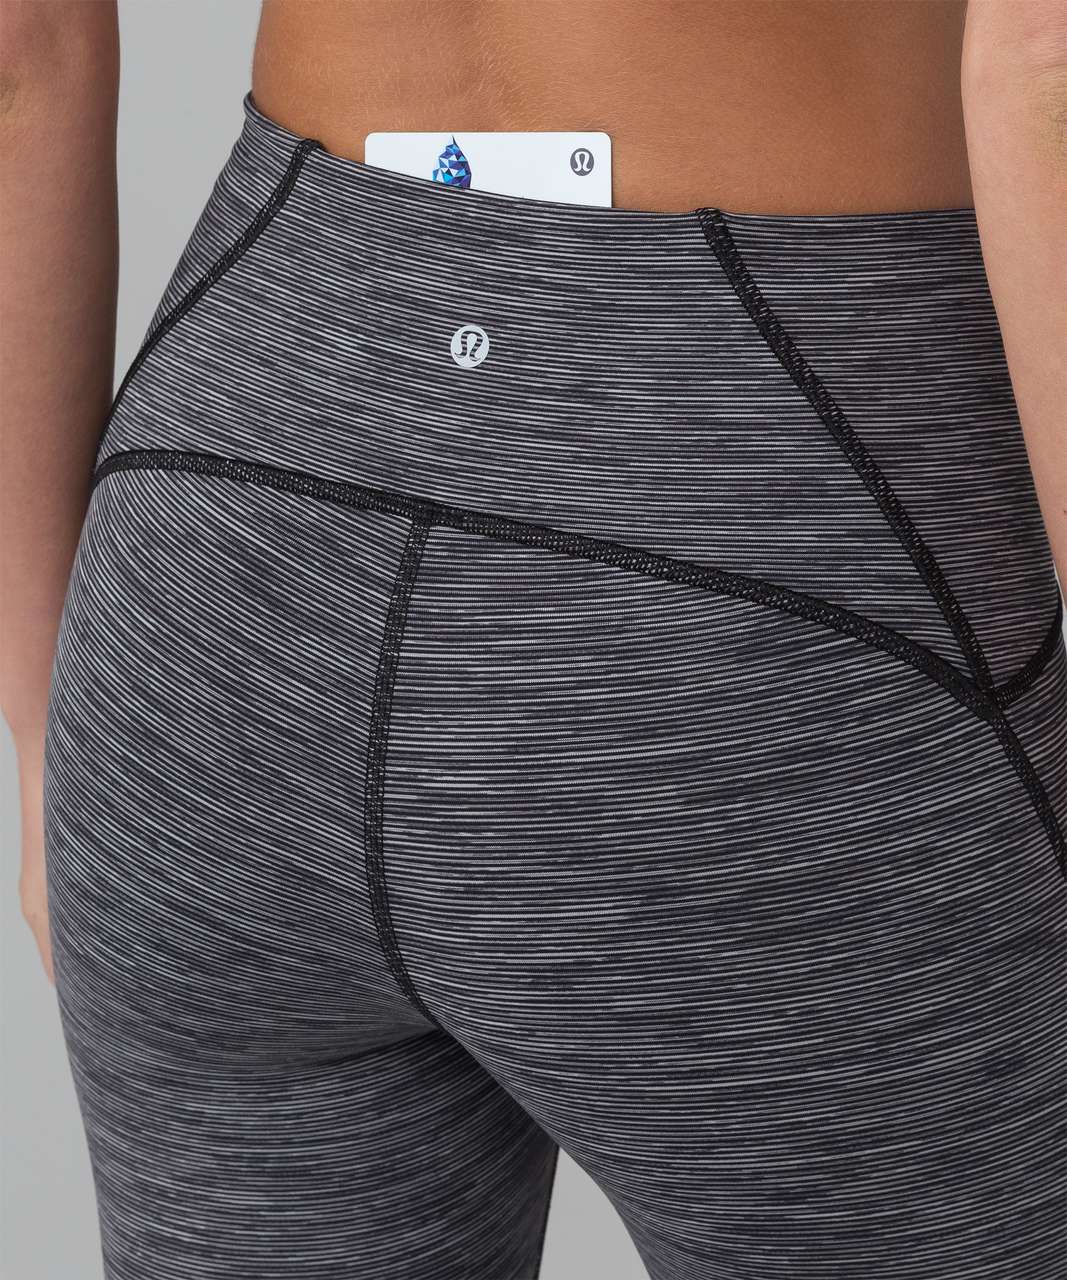 Lululemon Train Times Pant 25 In Wee Are From Space Sheer Blue Chambray